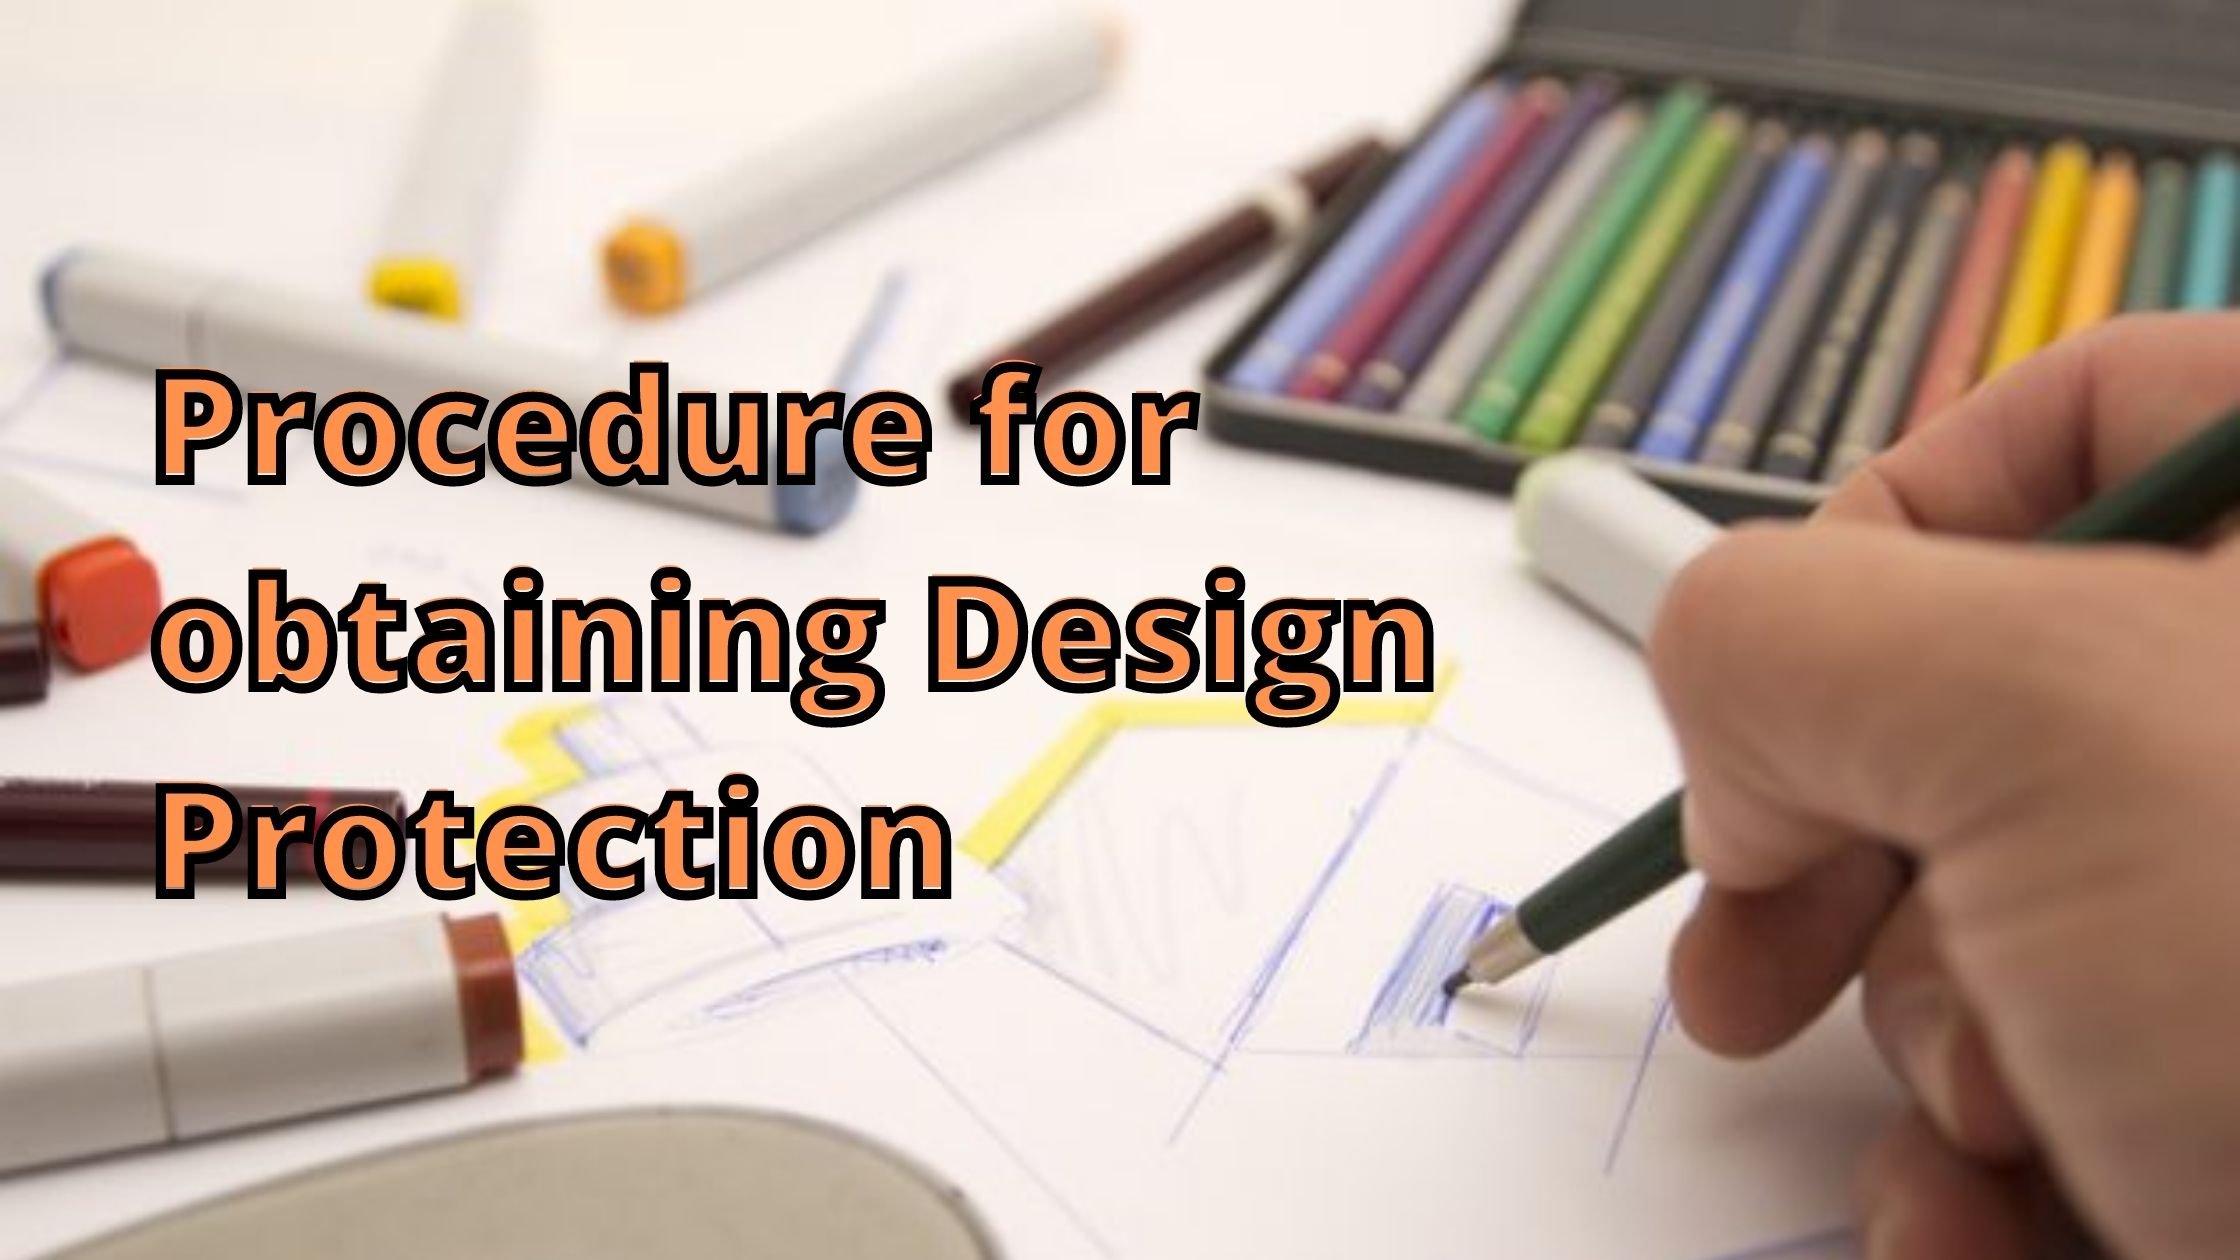 Procedure for obtaining Design Protection